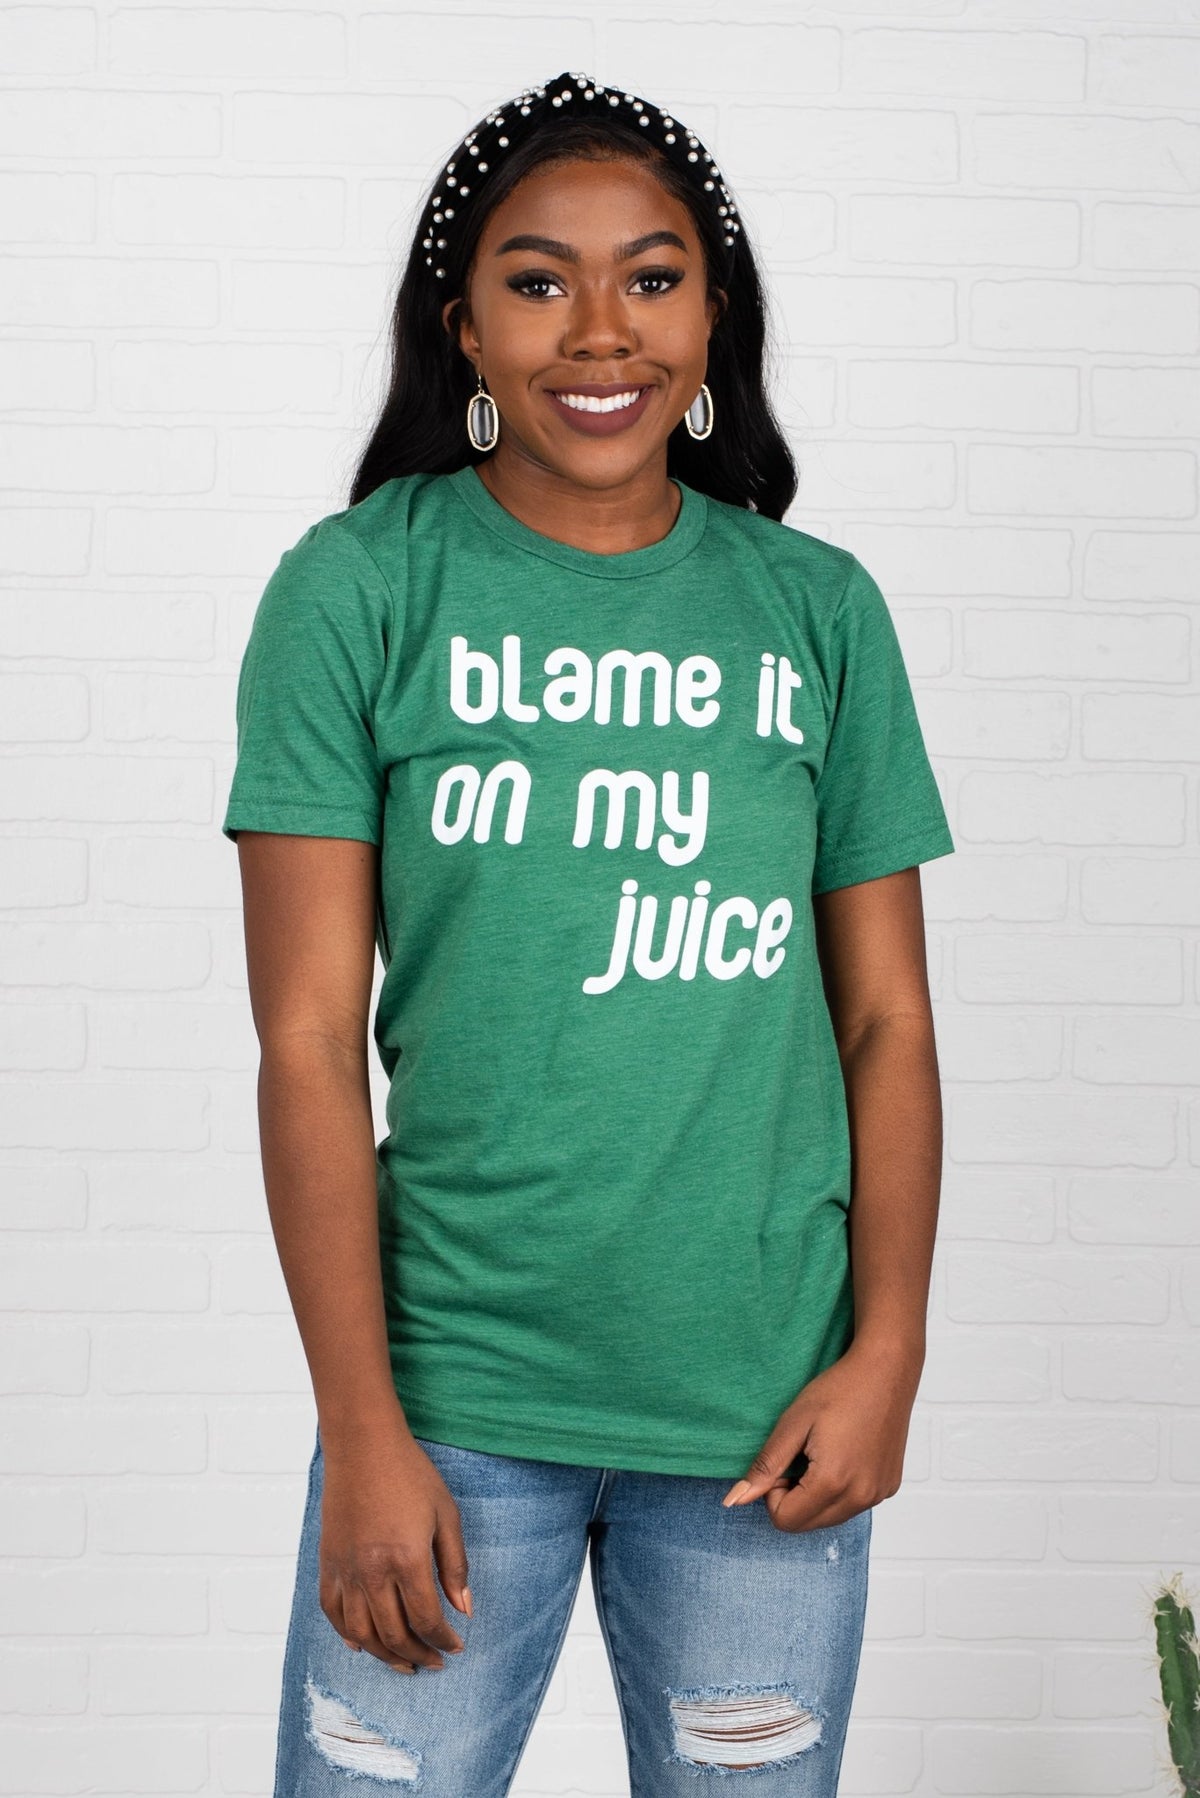 Blame it on my juice unisex short sleeve t-shirt green - Stylish T-shirts - Trendy Graphic T-Shirts and Tank Tops at Lush Fashion Lounge Boutique in Oklahoma City